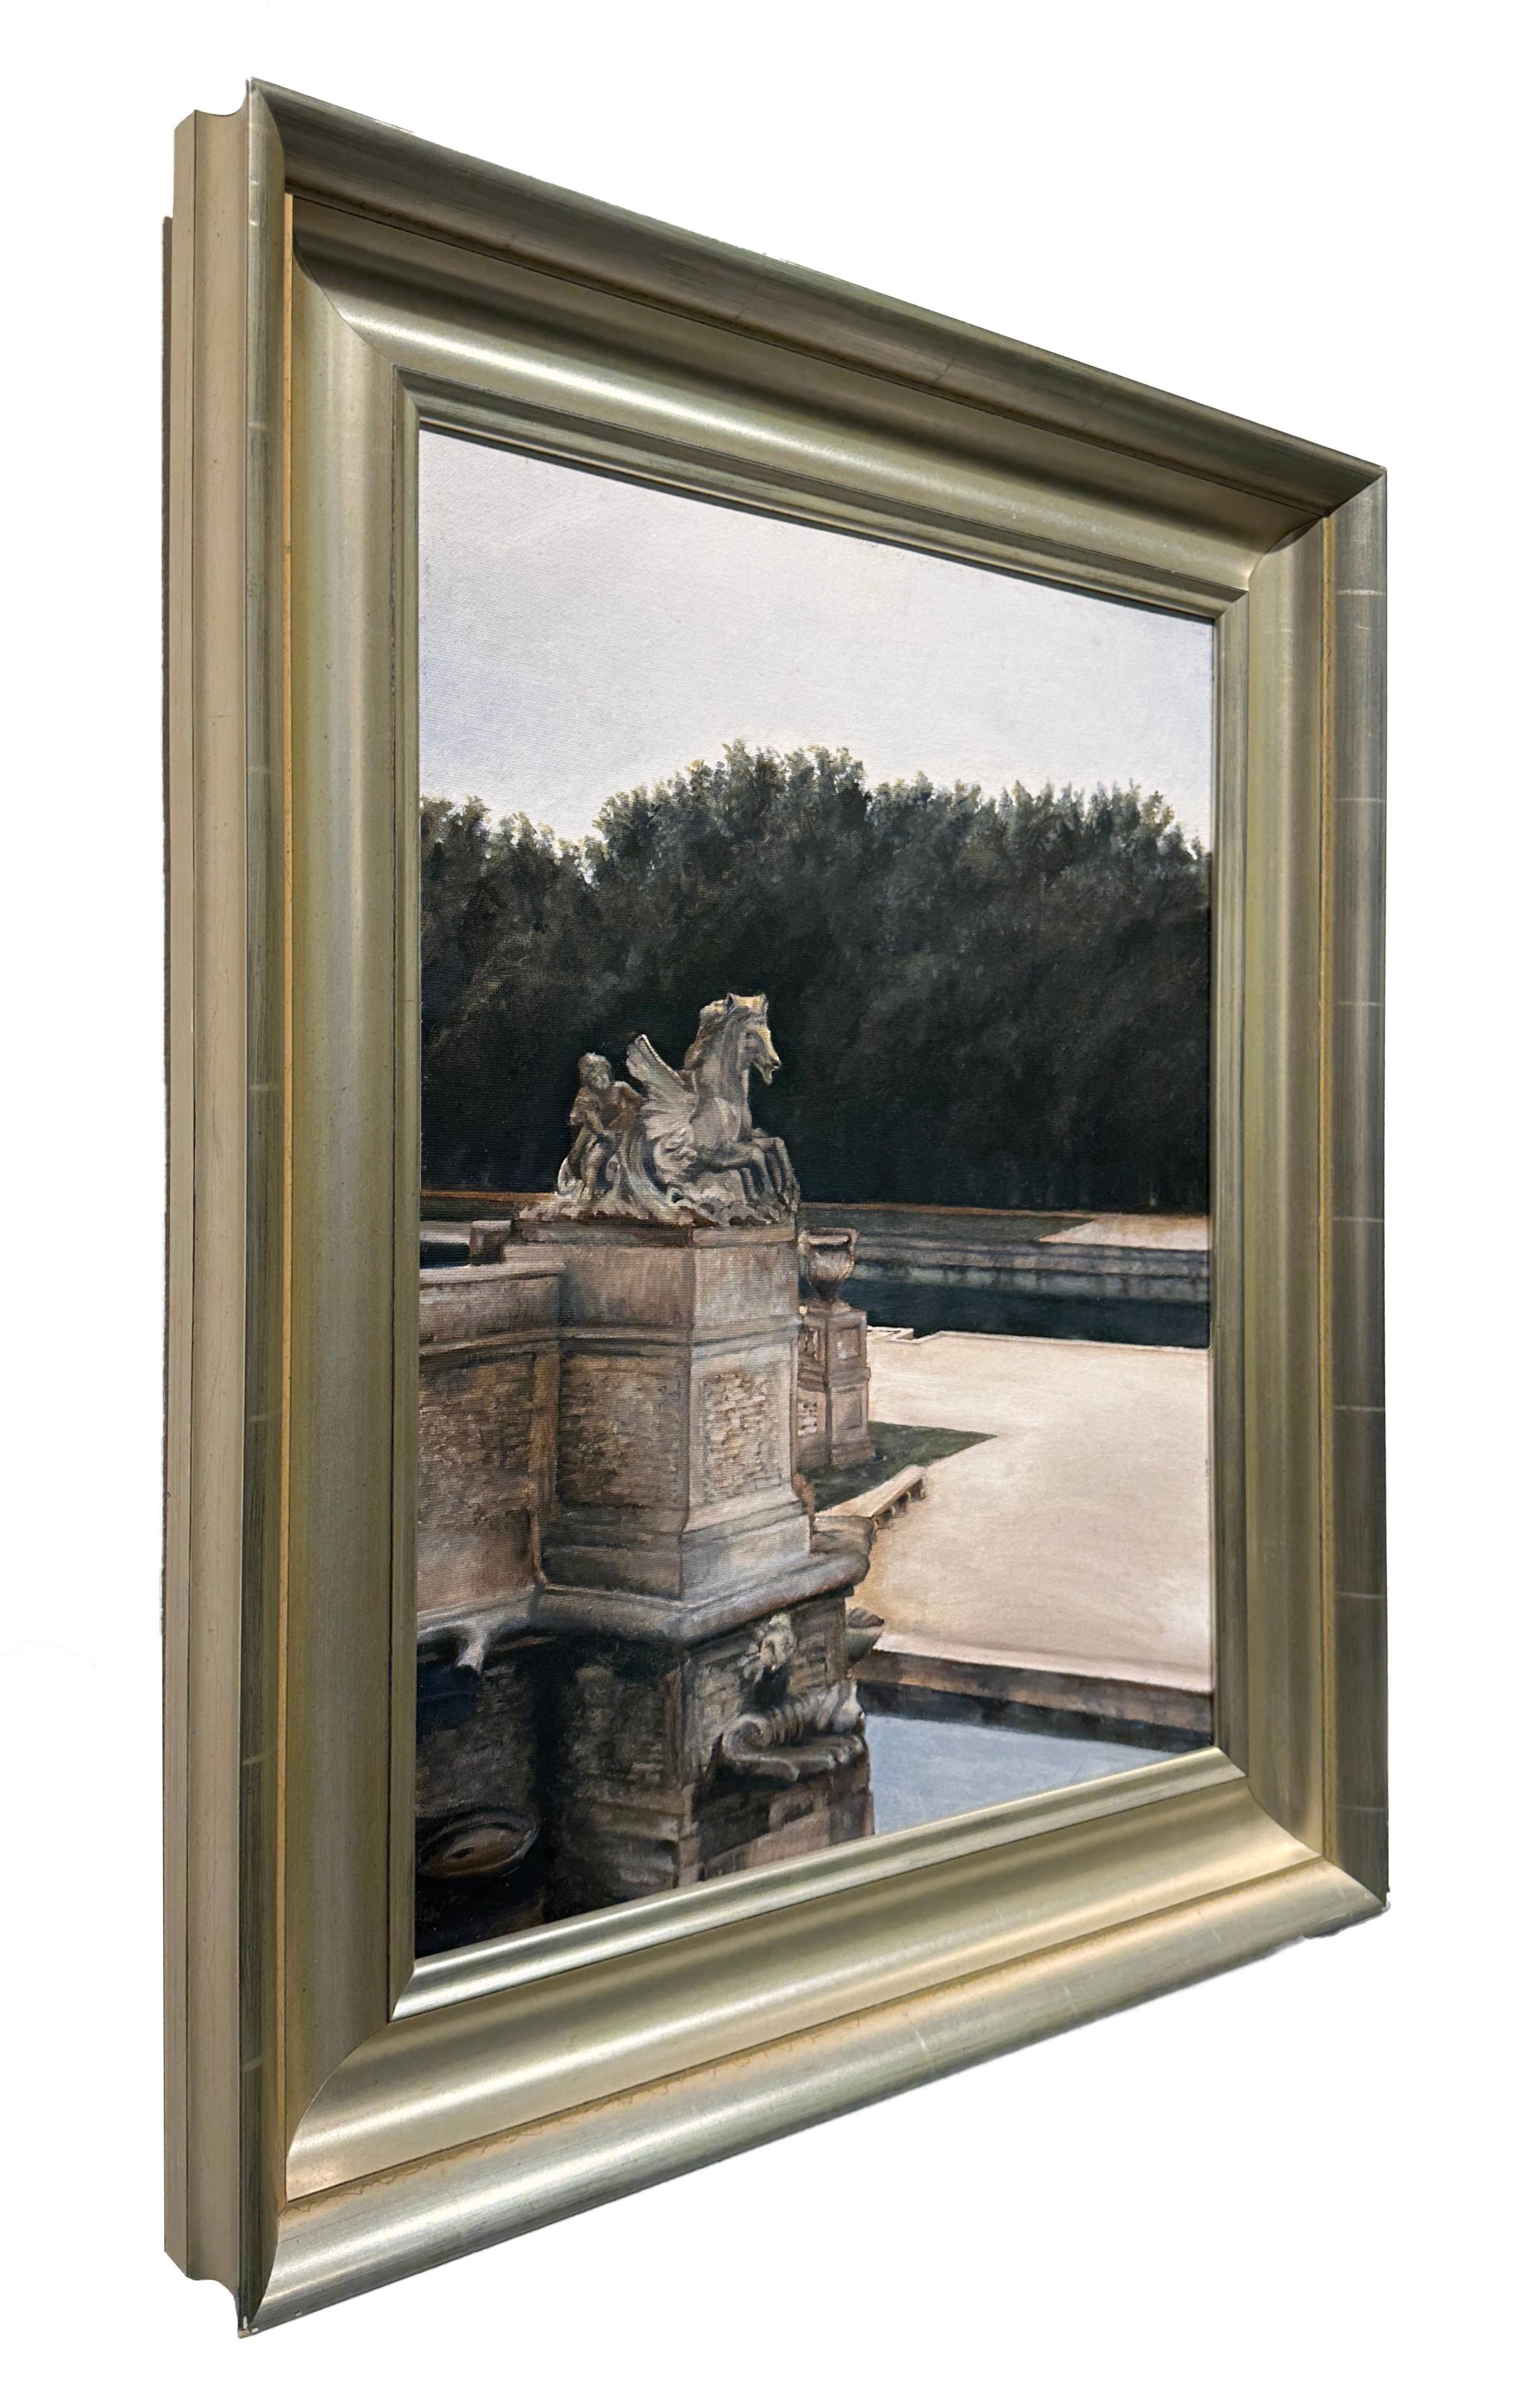 Richard Gibbons
Charioteau
oil on canvas board
20h x 16w in
50.80h x 40.64w cm
RAG099

Richard Gibbons
Born in Toledo, OH

1972–1973 American Academy in Rome Archaeological Study Grant
1973  B.S. in Architecture, University of Notre